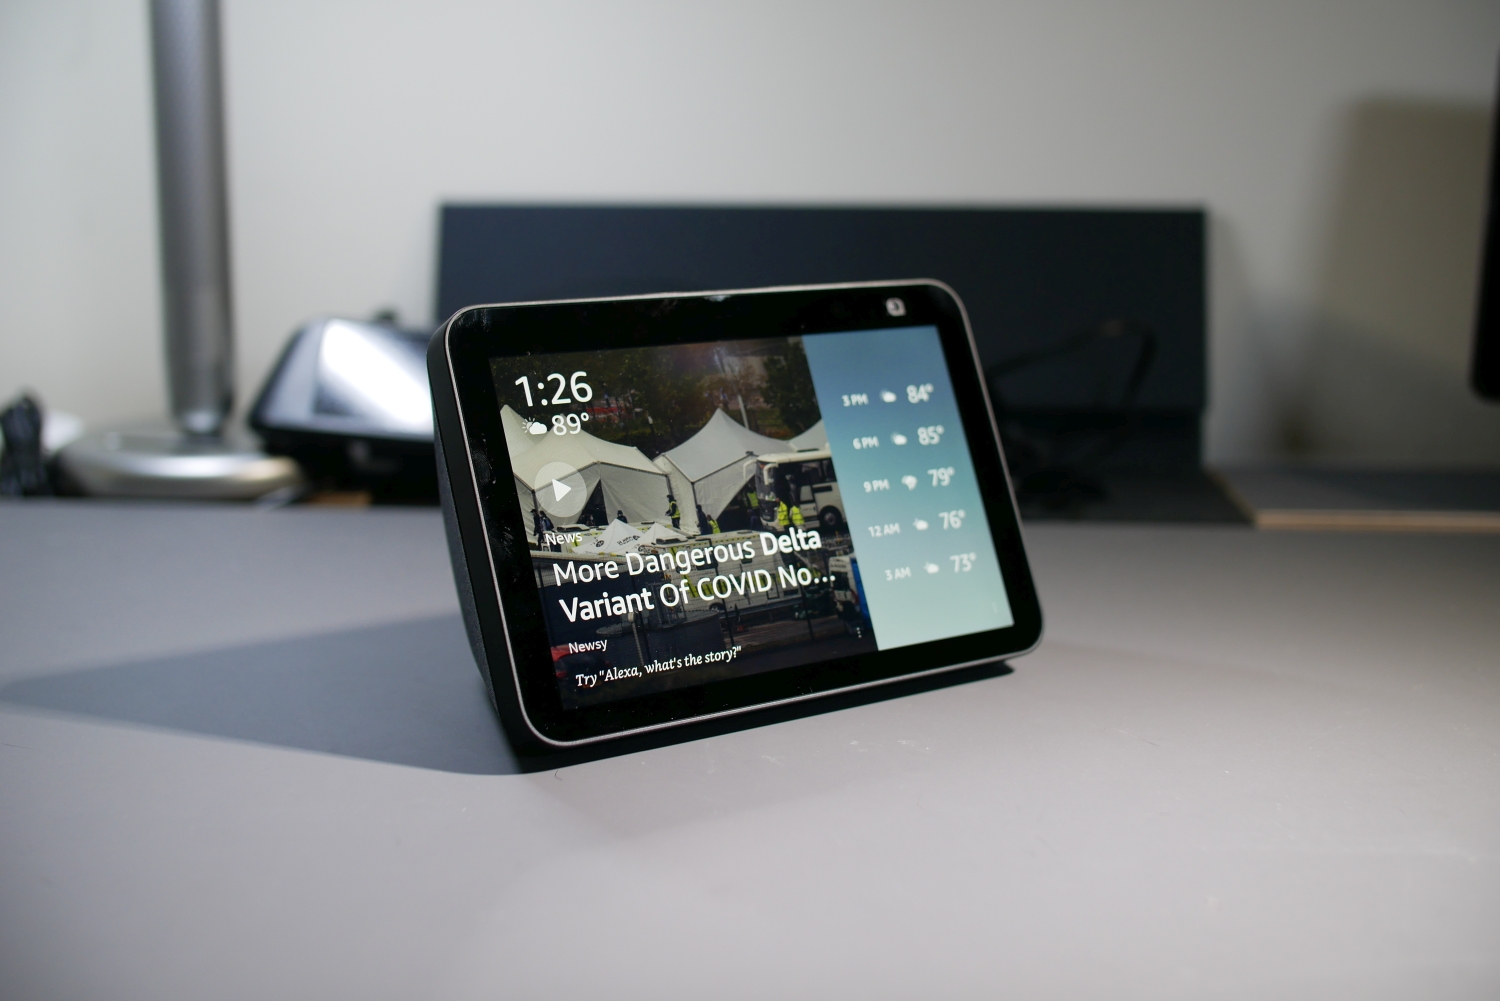 Echo Show 8 (2nd Gen) review: A worthy mid-range smart display